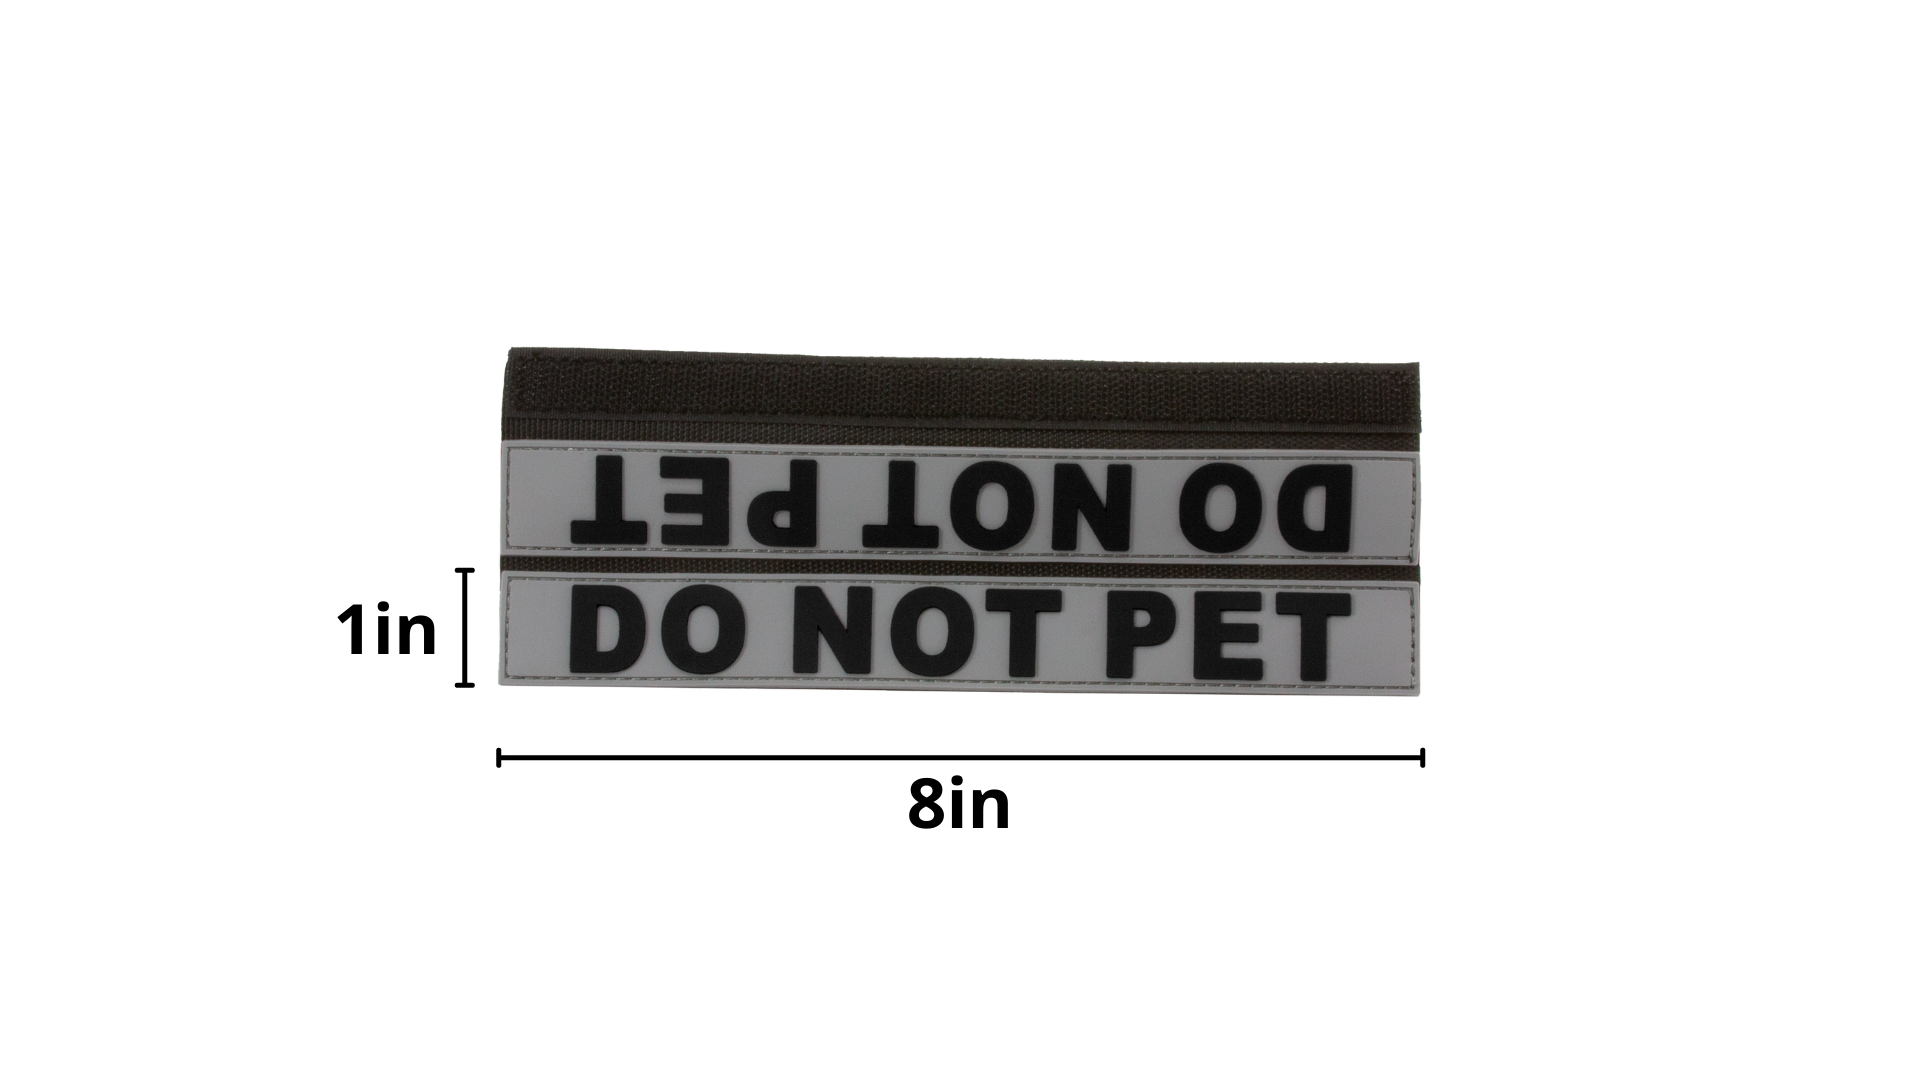 Do Not Pet dog leash sleeve, working dogs, reactive dogs, training dogs, dogs that need space.